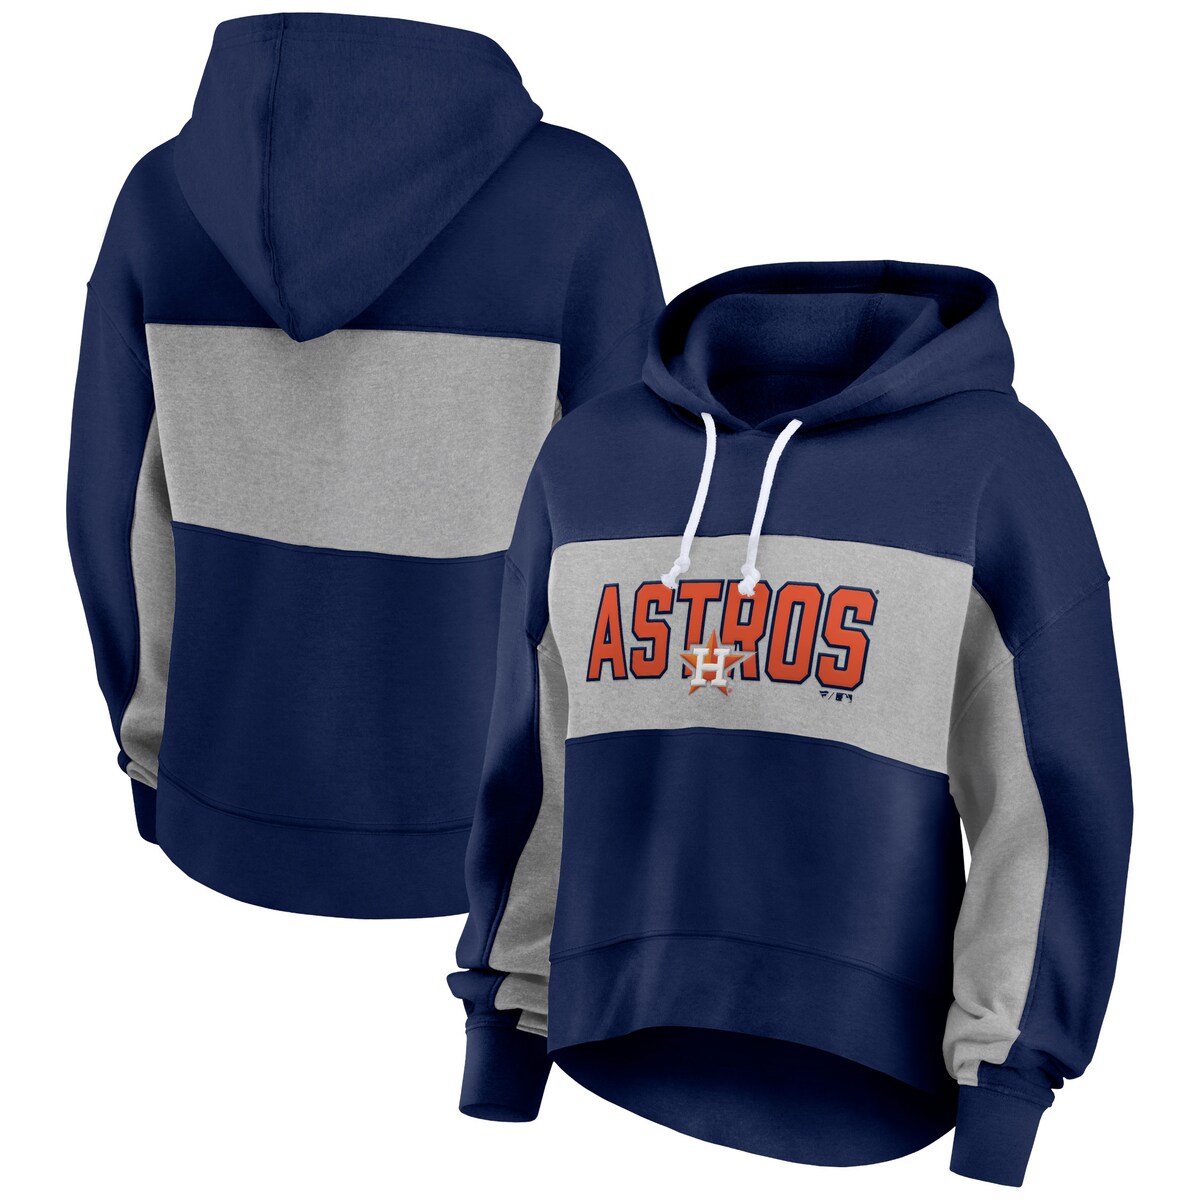 If you're a die-hard Houston Astros fan, then be sure to add this Filled Stat Sheet pullover hoodie to your rotation. It features unmistakable team graphics going across the front, which are emphasized by the contrast-color panel on the chest. The rounded droptail hem provides a stylish look that will quickly make this midweight top a staple for Houston Astros game day.ImportedHoodedOfficially licensedMachine wash, tumble dry lowPulloverScreen print graphicsBrand: Fanatics BrandedRounded droptail hemMaterial: 60% Cotton/40% PolyesterLong sleeveMidweight hoodie suitable for moderate temperatures